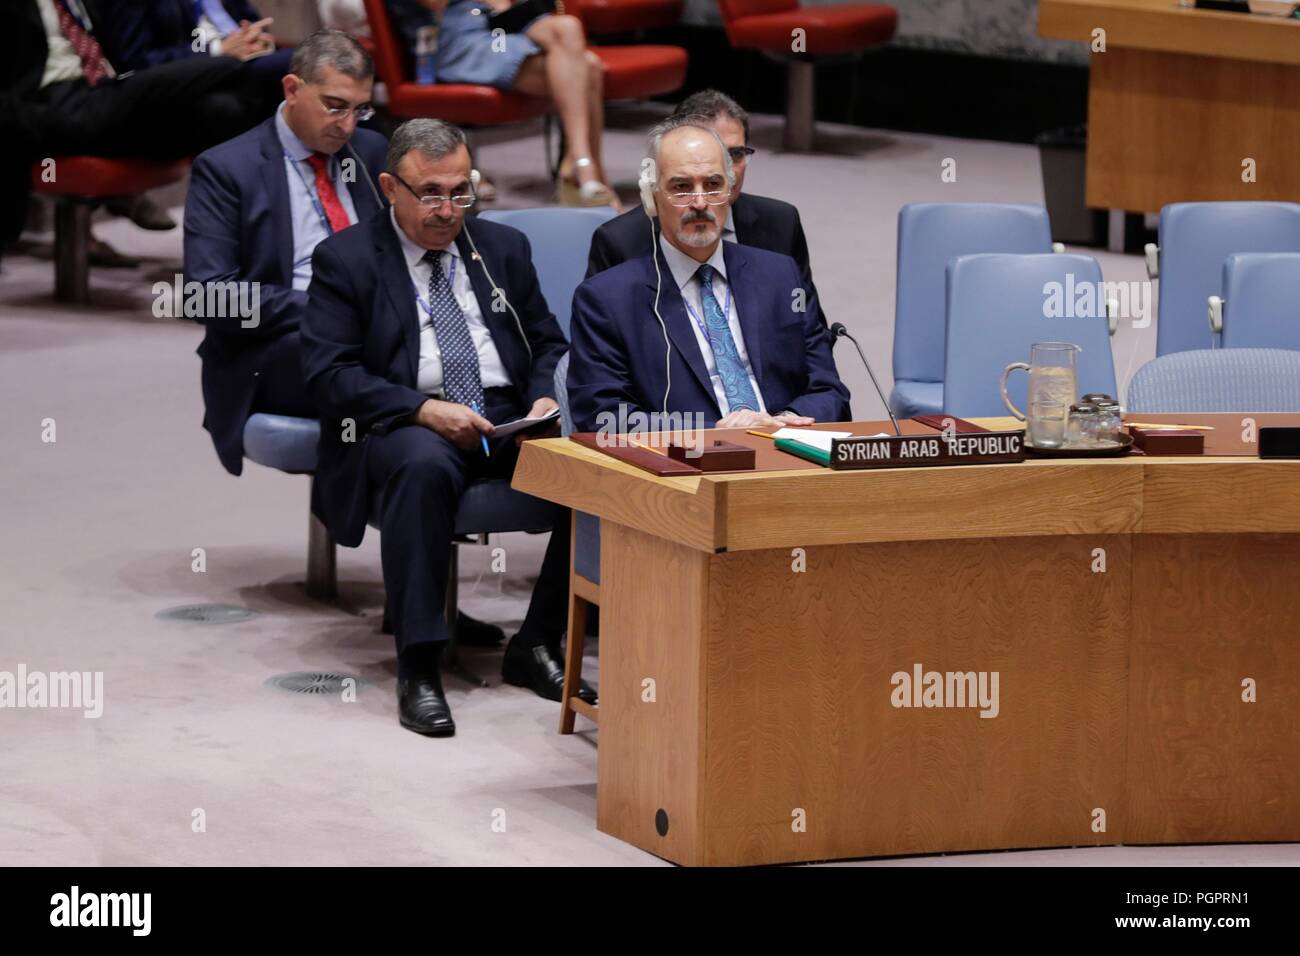 United Nations, New York, USA, August 28, 2018 - Bashar Jaafari, Permanent Representative of the Syrian Arab Republic to the United Nations During the Security Council meeting on the situation in the Middle East (Syria) today at the UN Headquarters in New York. Photo: Luiz Rampelotto/EuropaNewswire | usage worldwide Credit: dpa picture alliance/Alamy Live News Stock Photo